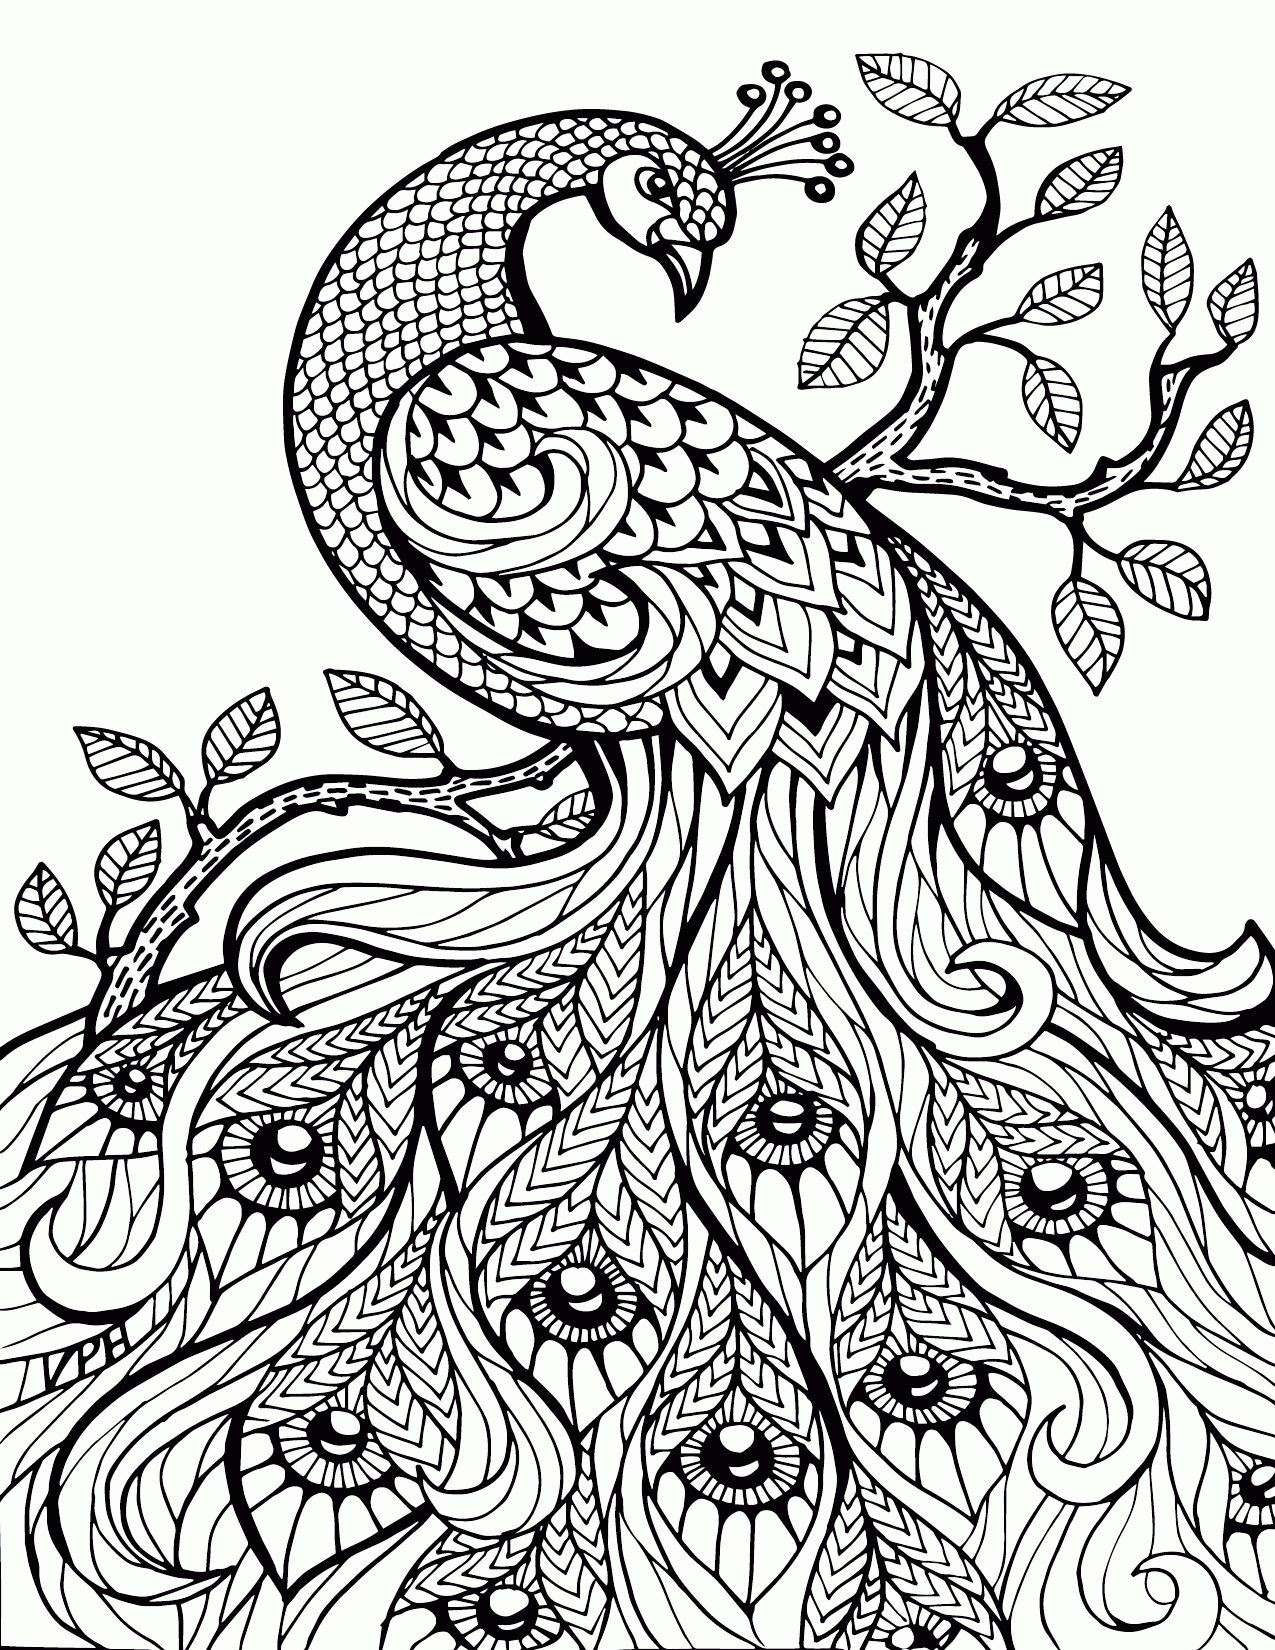 coloring pages | Adult coloring ...